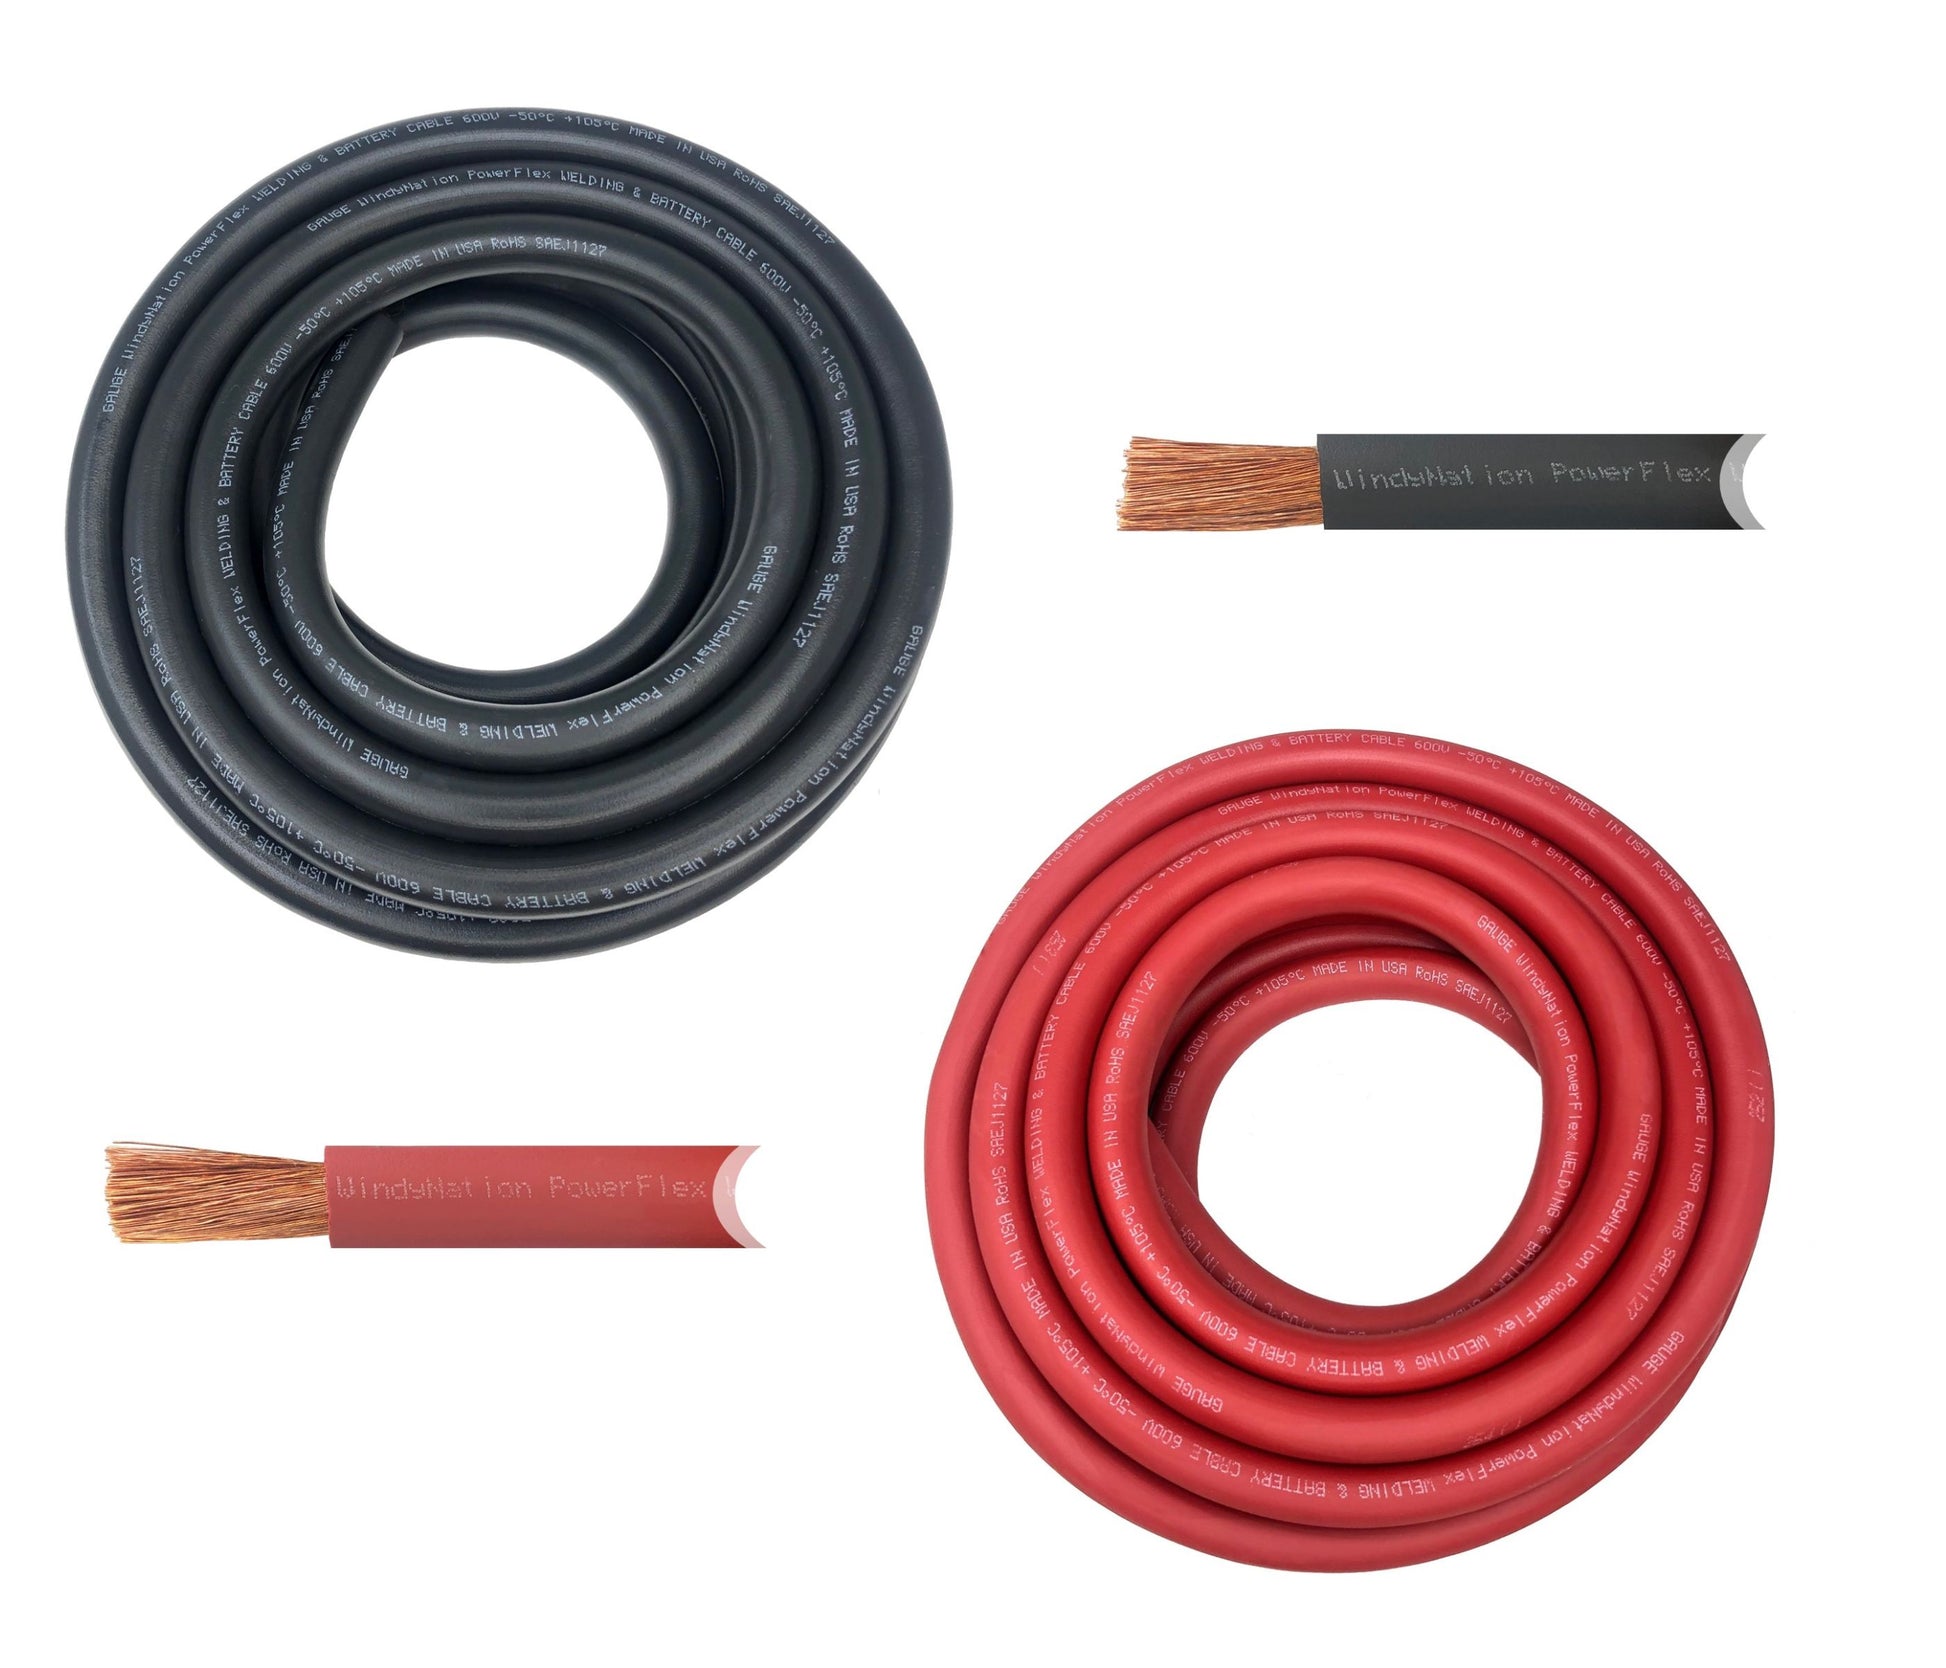 10 GAUGE WIRE RED & BLACK POWER GROUND 50 FT EACH PRIMARY STRANDED COPPER  CLAD - Best Connections